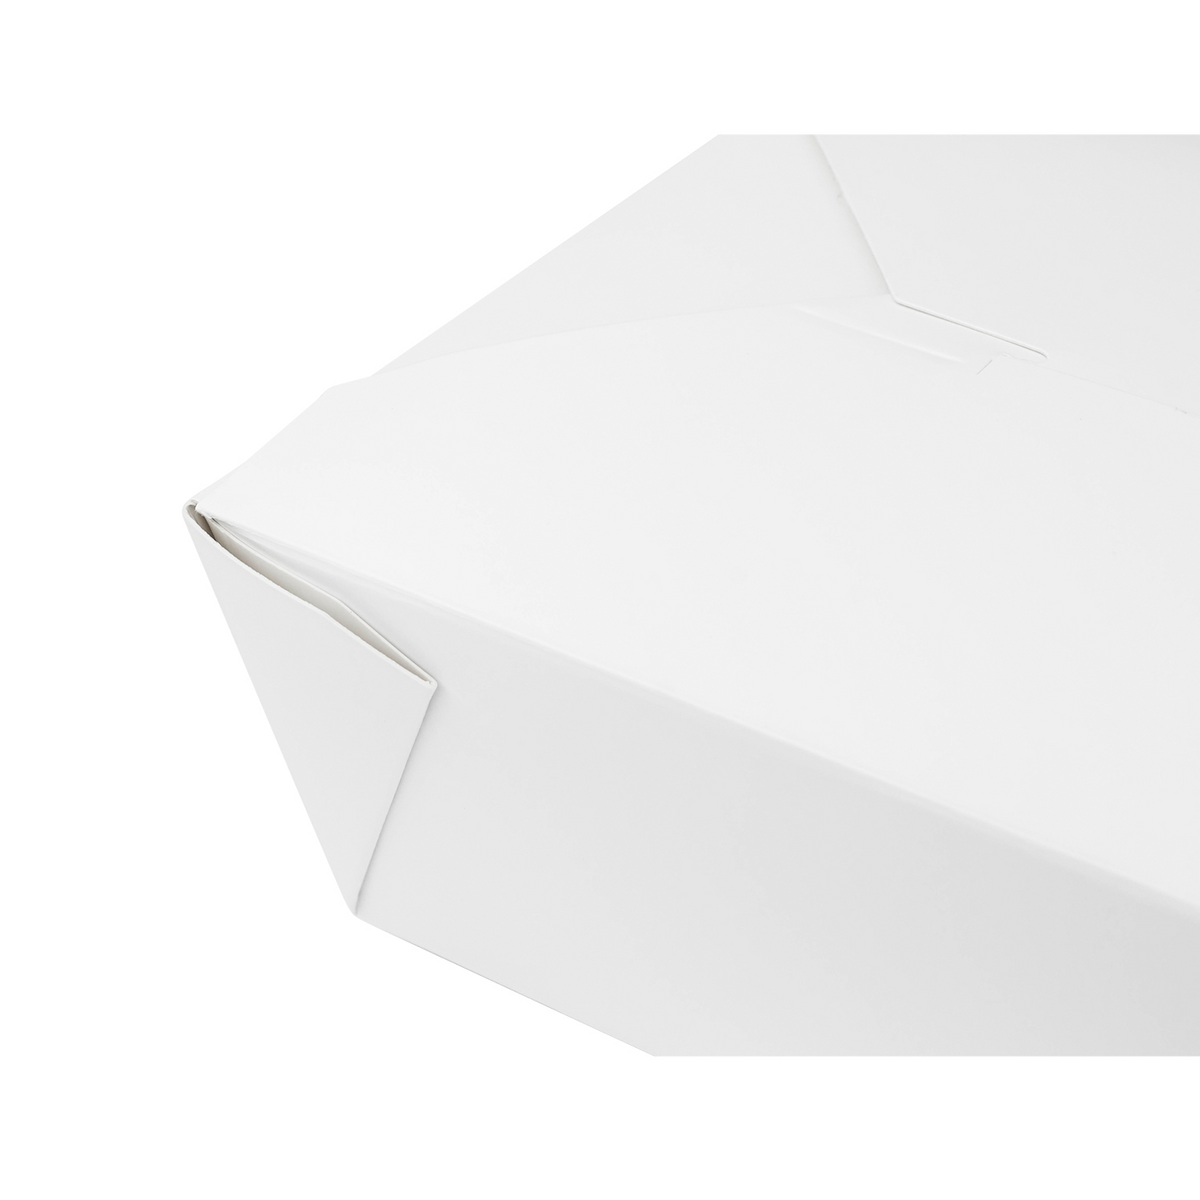 https://www.restaurantsupplydrops.shop/wp-content/uploads/1689/34/the-newest-white-microwavable-folded-paper-8-take-out-container-karat-fold-to-go-box-48oz-5-9-x-4-6-x-2-4-300-count-karat-is-now-available-for-purchase-at-a-great-price_4.png